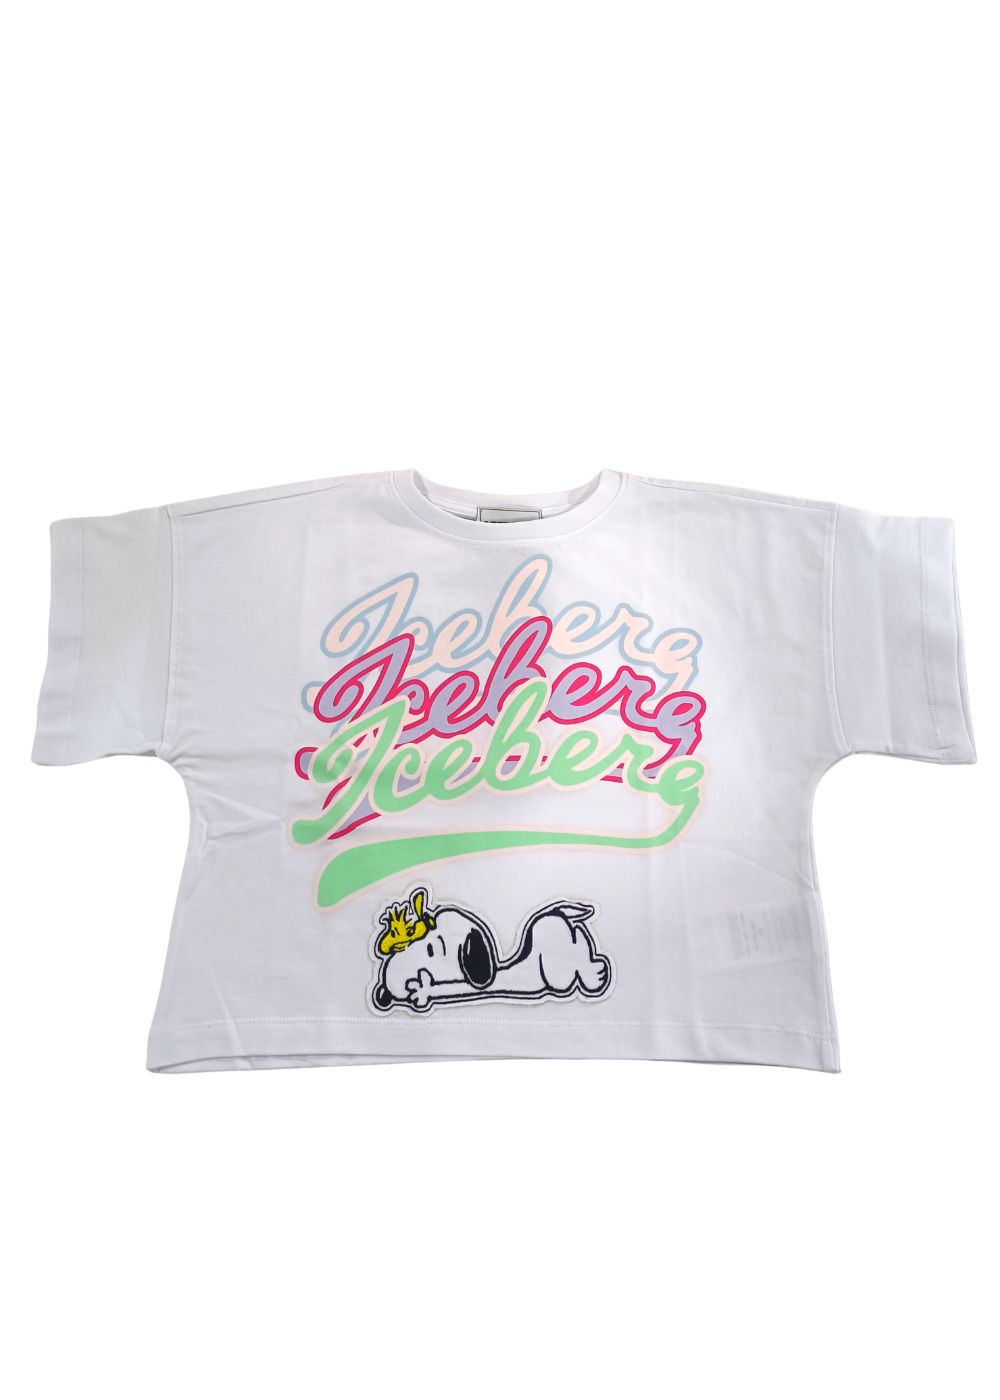 Featured image for “Iceberg T-shirt Snoopy”